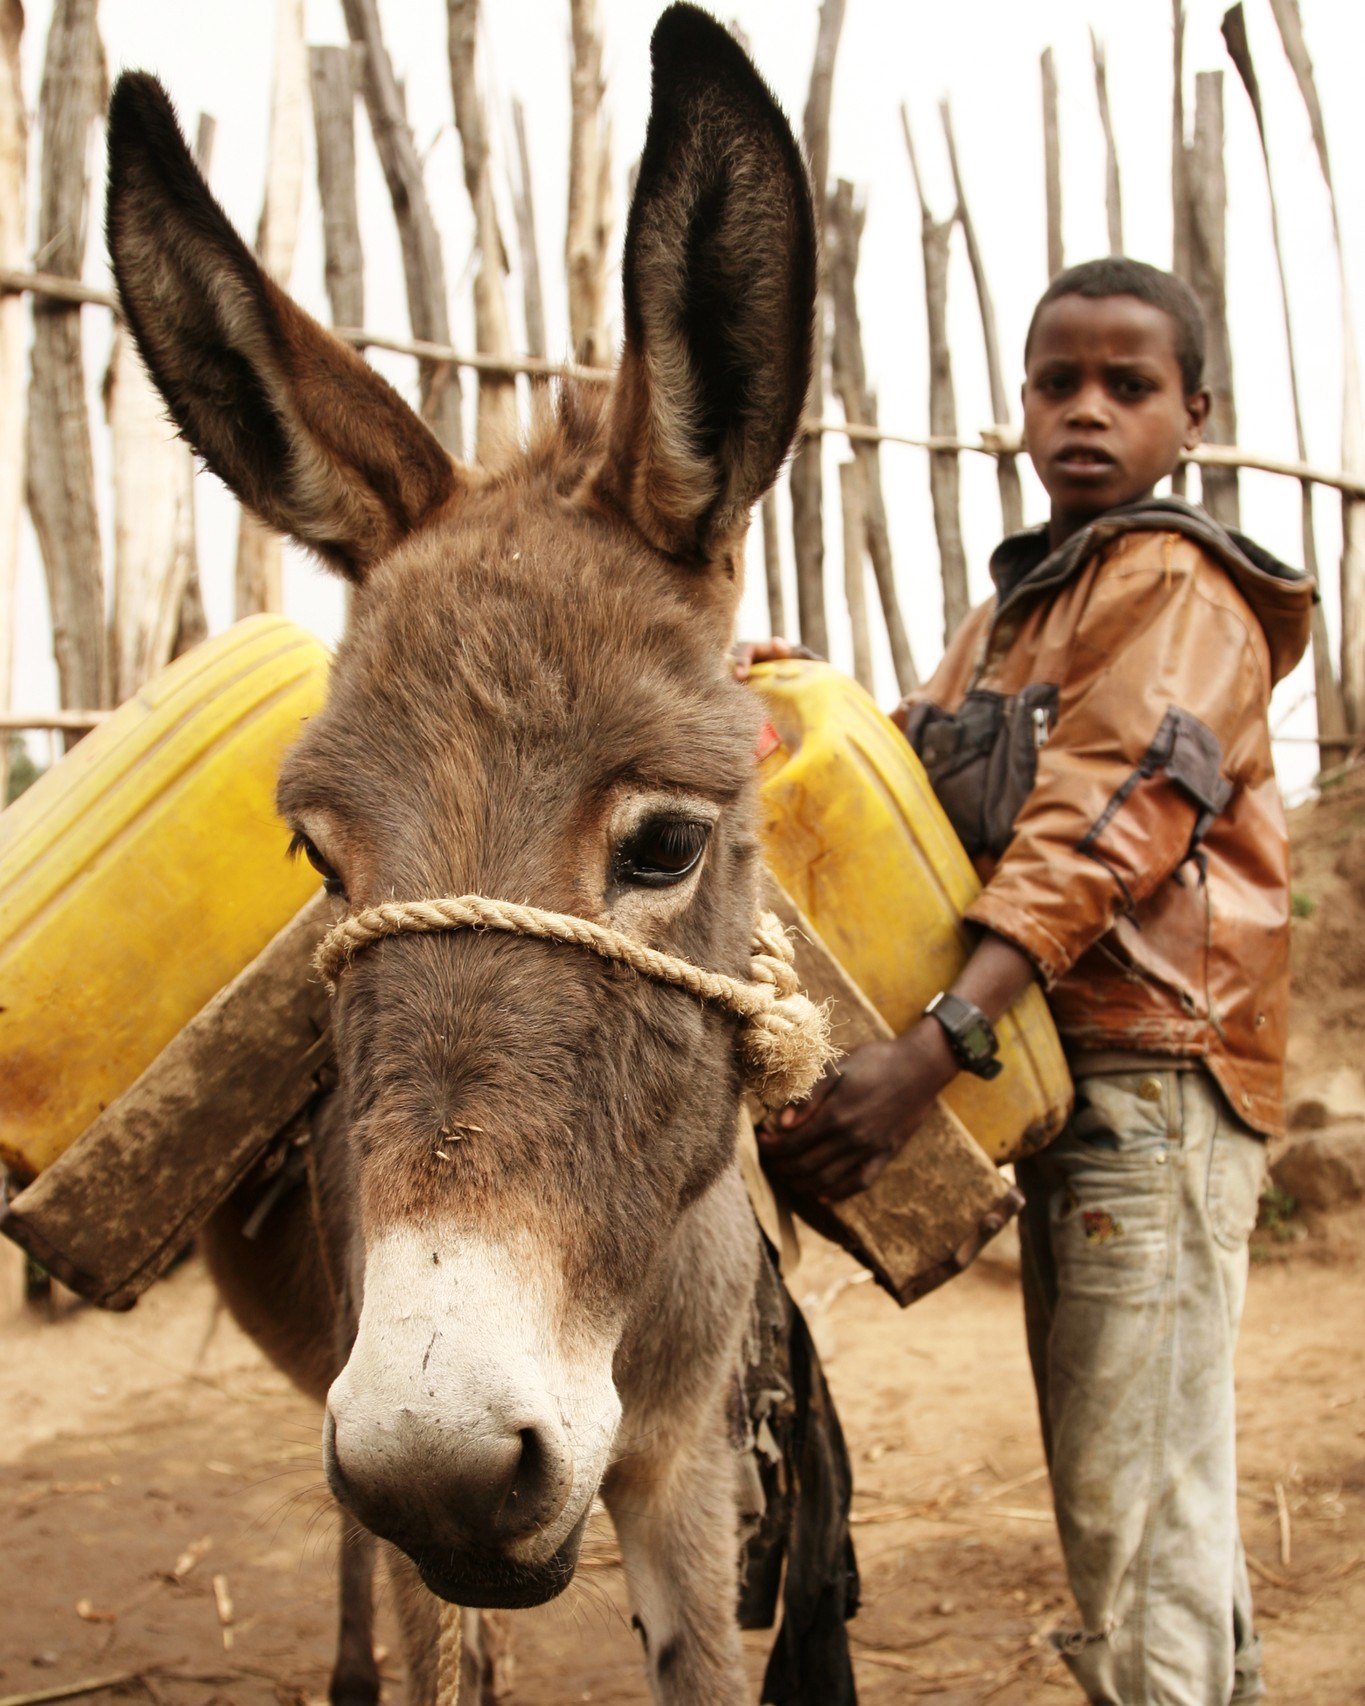 Your support is the key to alleviating the immediate suffering of the world's most vulnerable working horses, donkeys, and mules. Together, we can create meaningful change, achieve global impact, and make sustainable improvements that transform lives